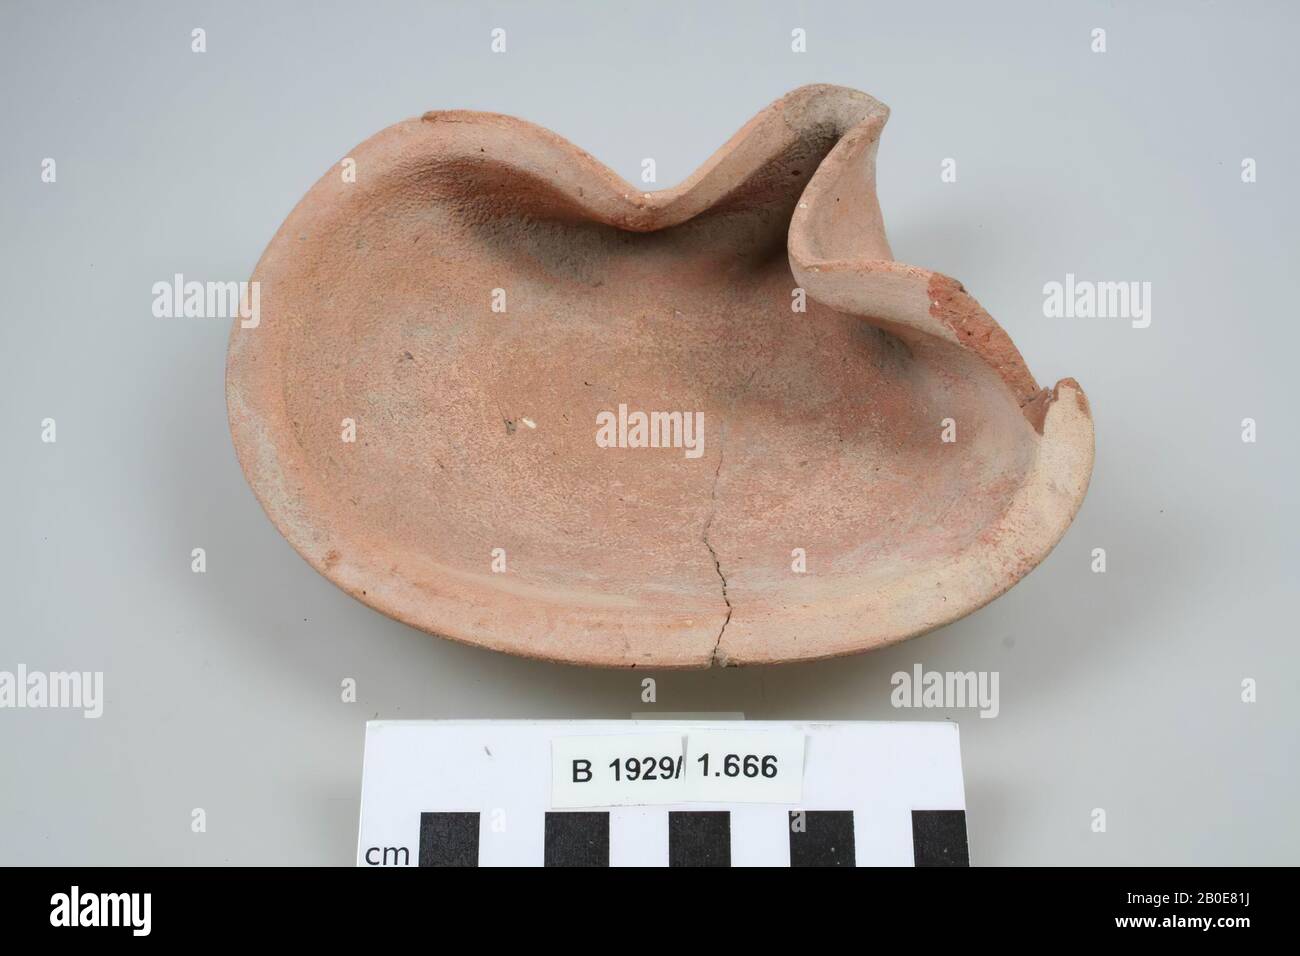 A light with one accented spout and a slightly round bottom., Crockery, earthenware, L 16.9 cm, W 17.5 cm, H 5.5 cm, Palestine Stock Photo